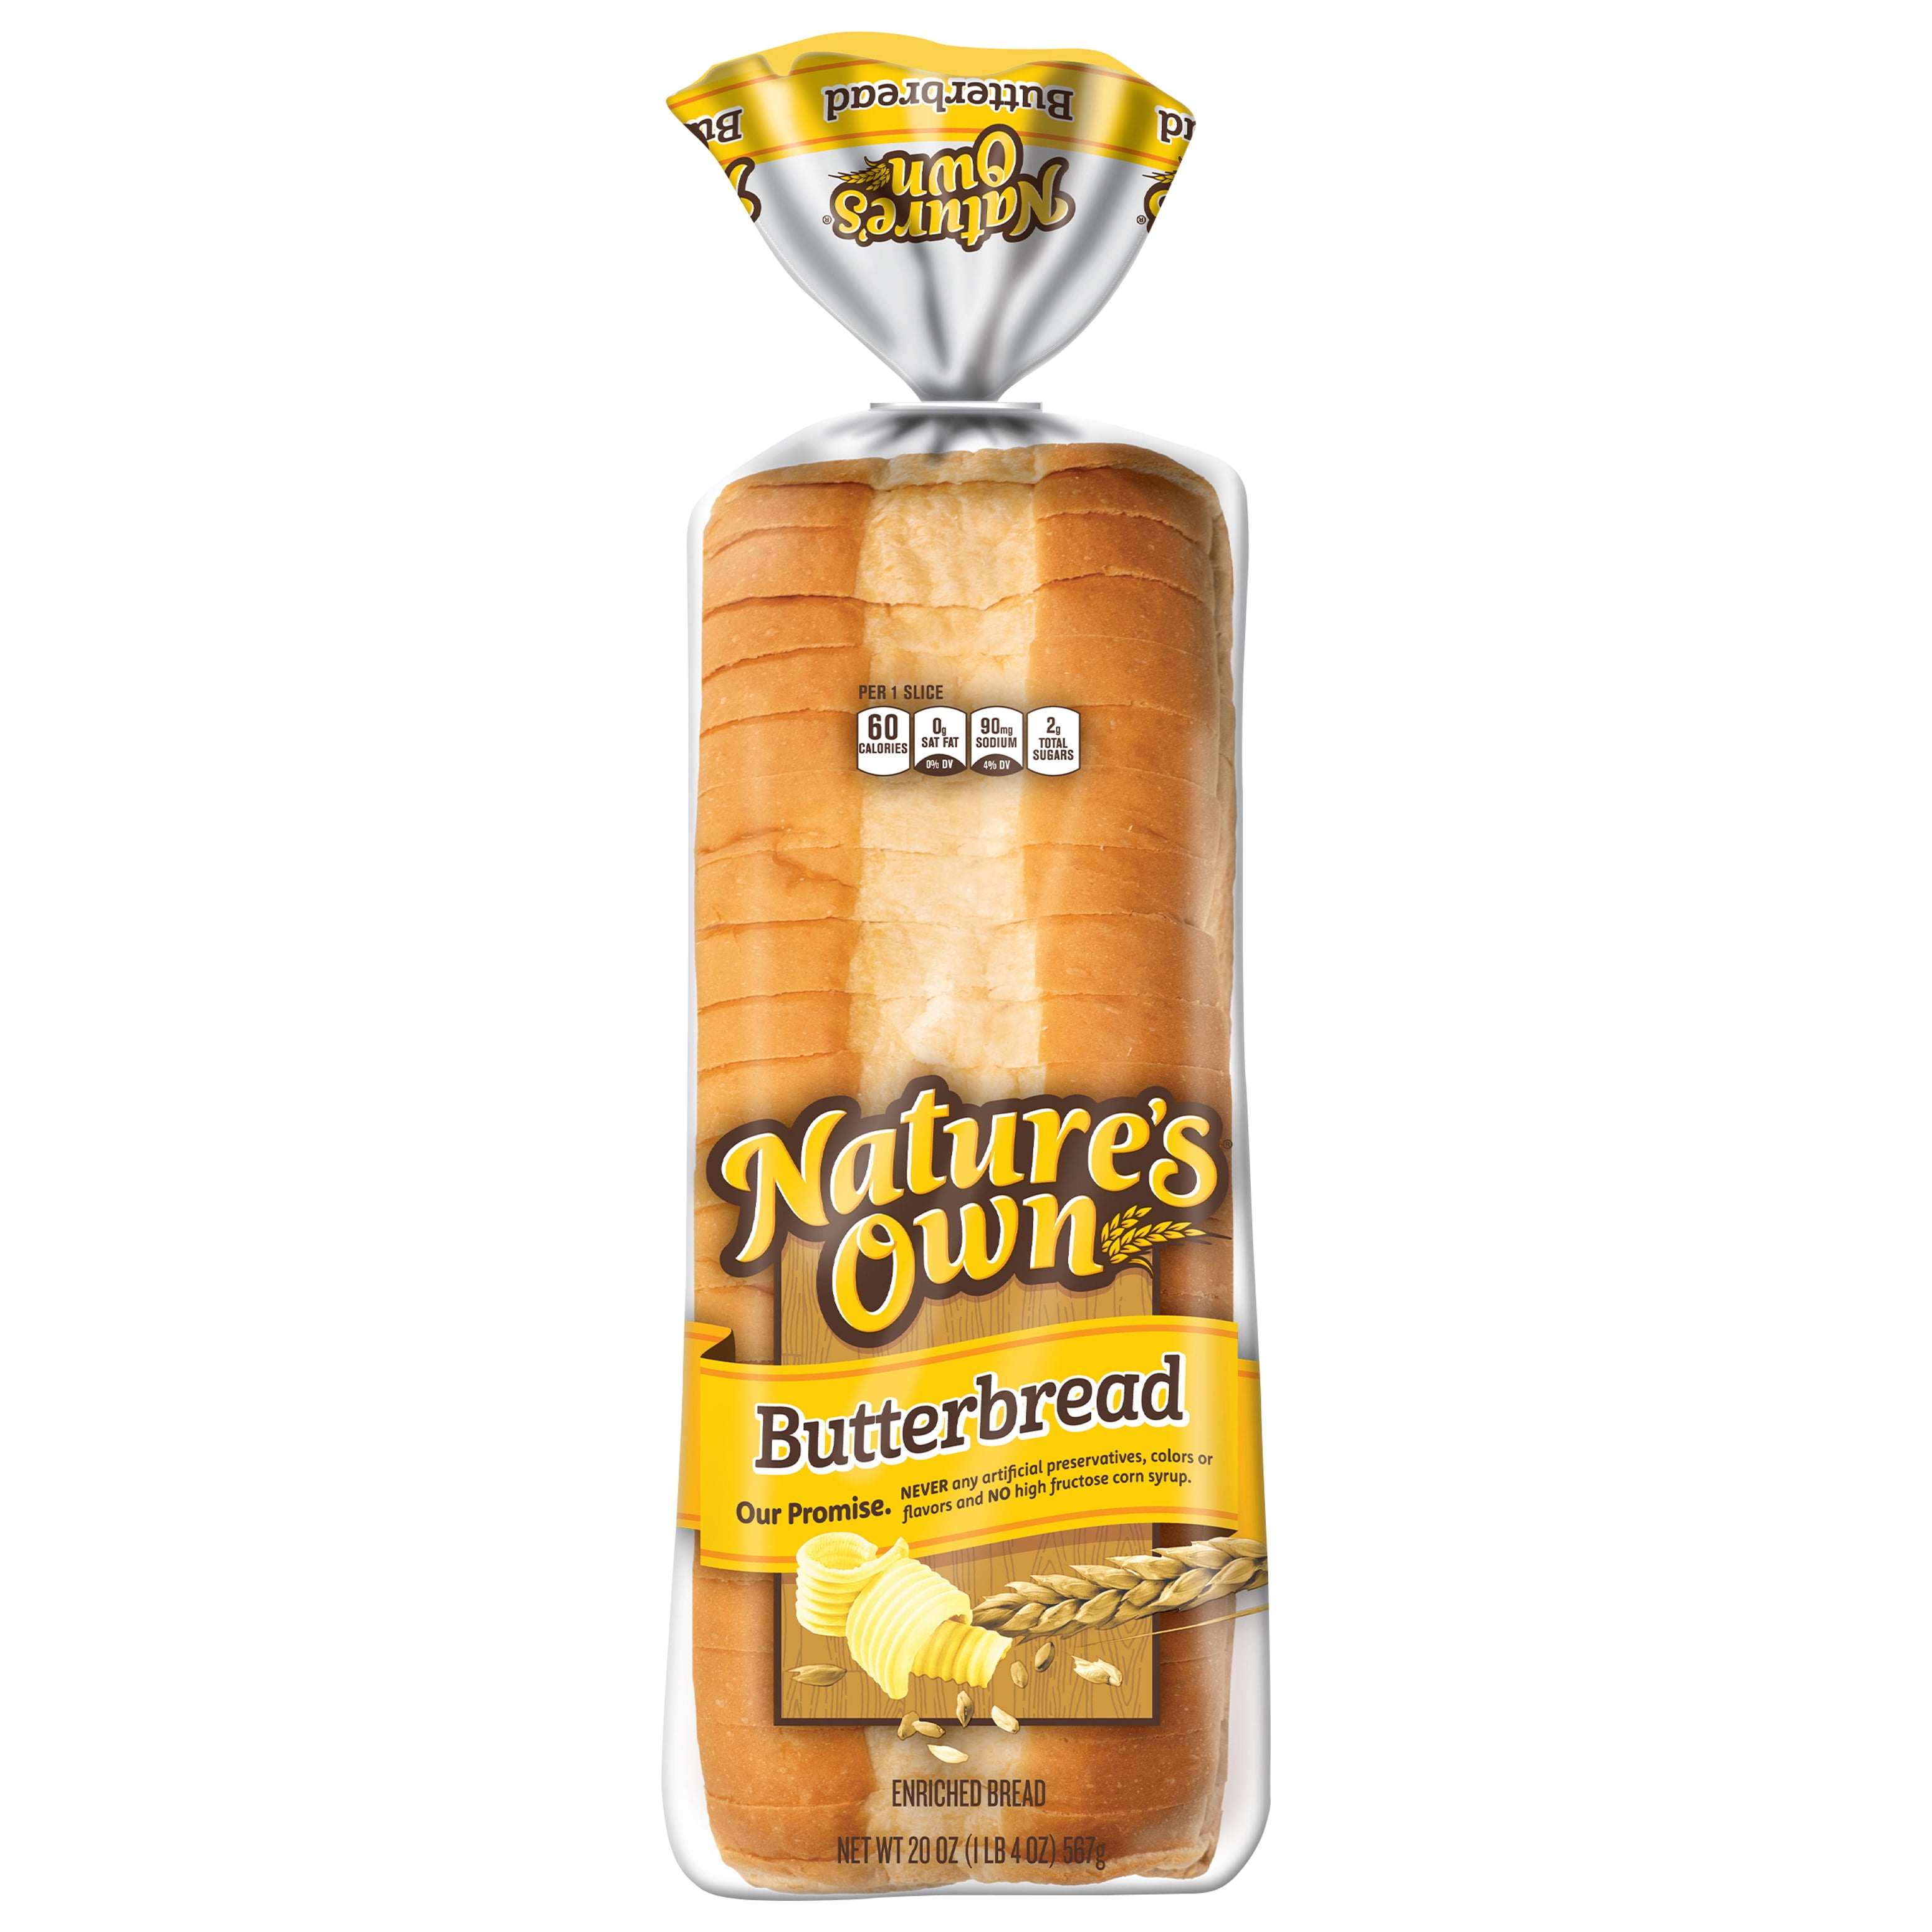 Nature's Own Butterbread Bread Loaf, 20 oz